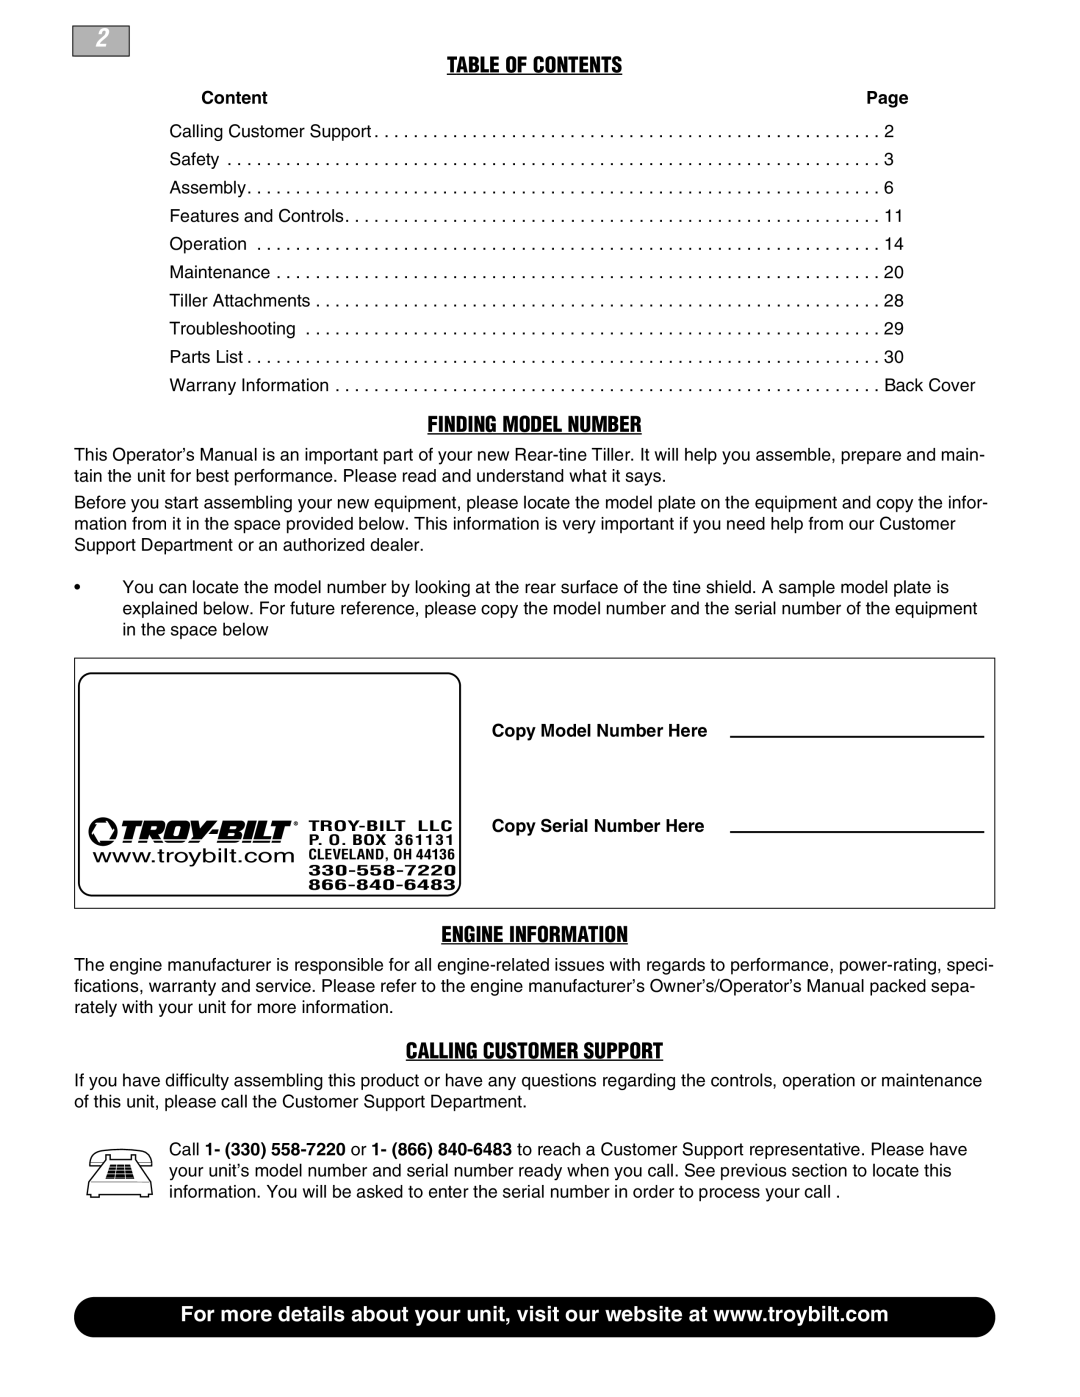 Troy-Bilt 664D-Pony manual Table Of Contents, Finding Model Number, Engine Information, Calling Customer Support 